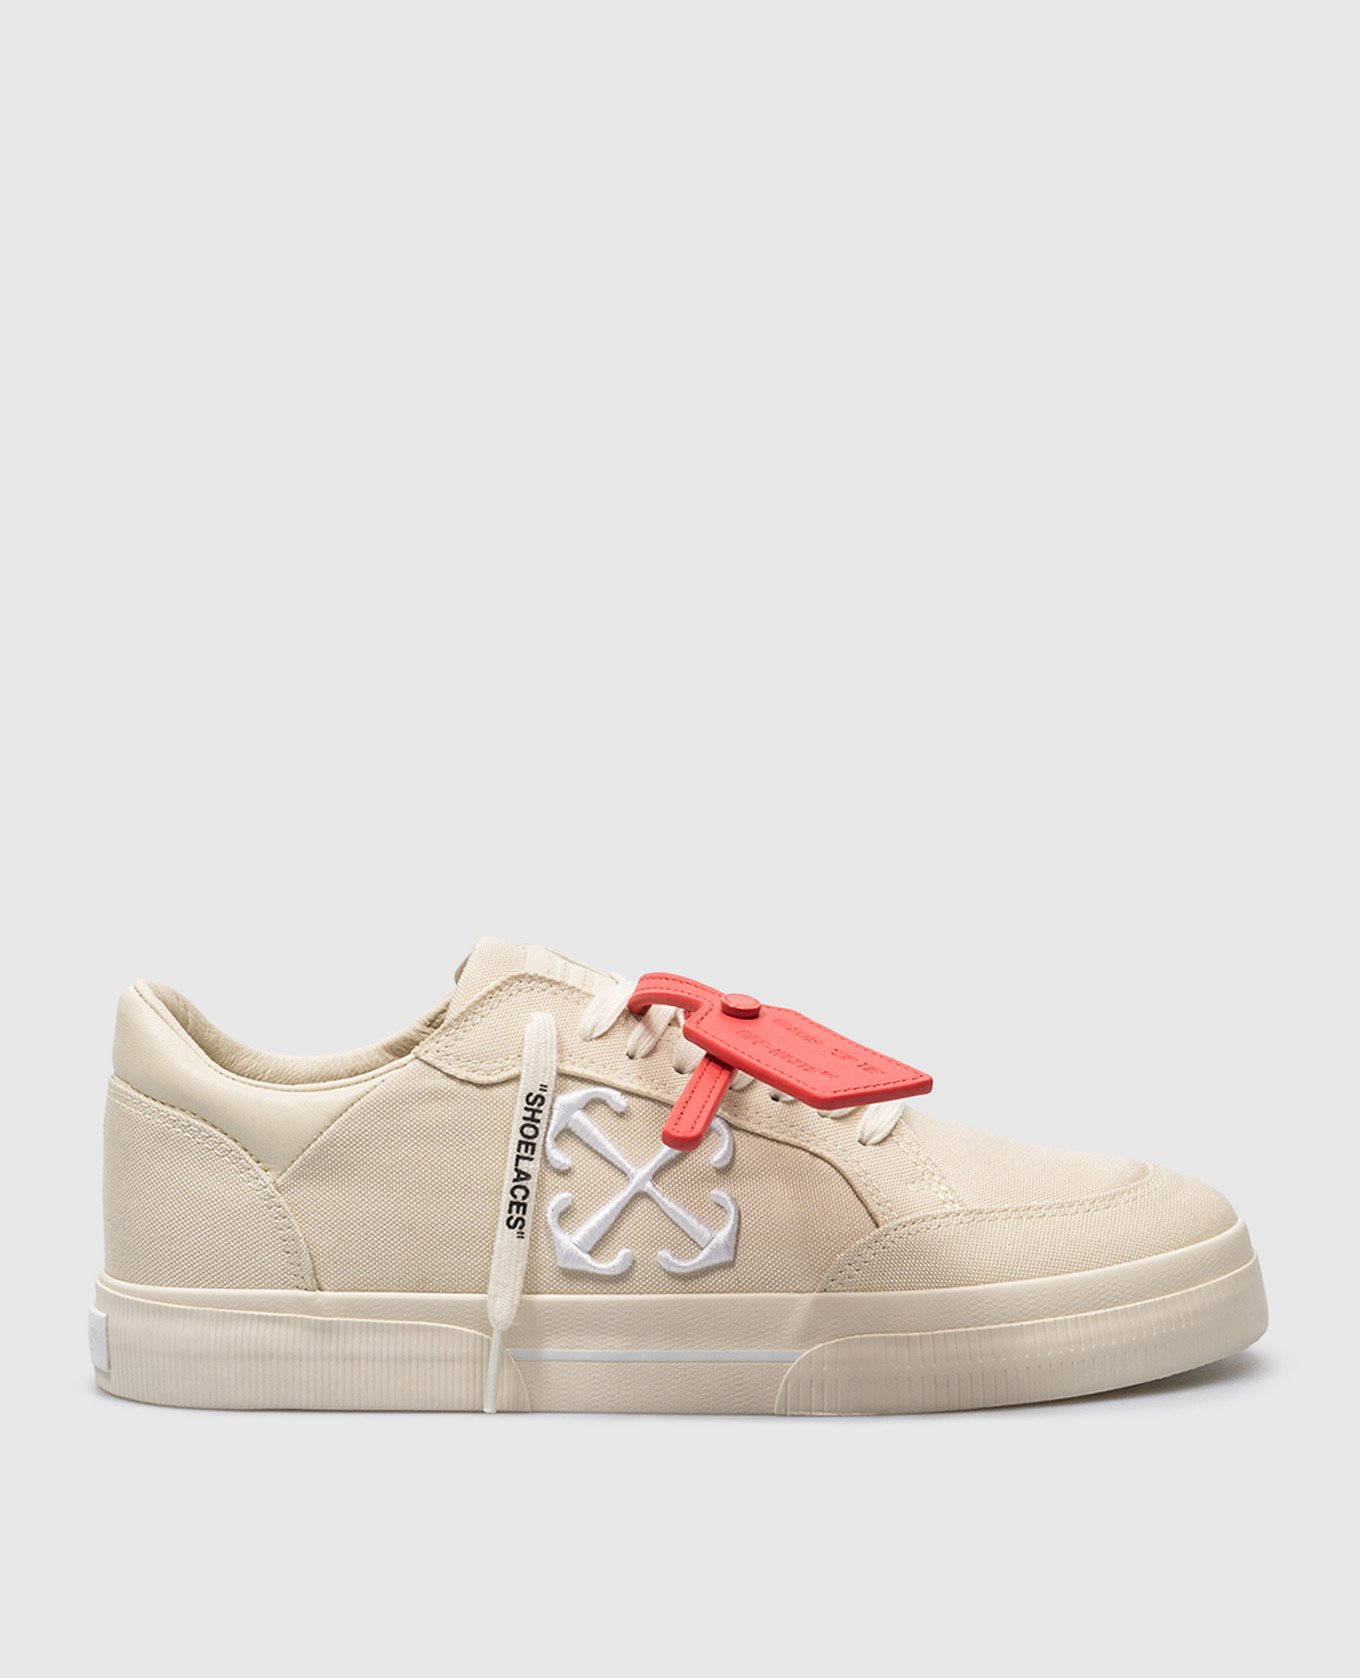 Beige sneakers with Arrow logo embroidery